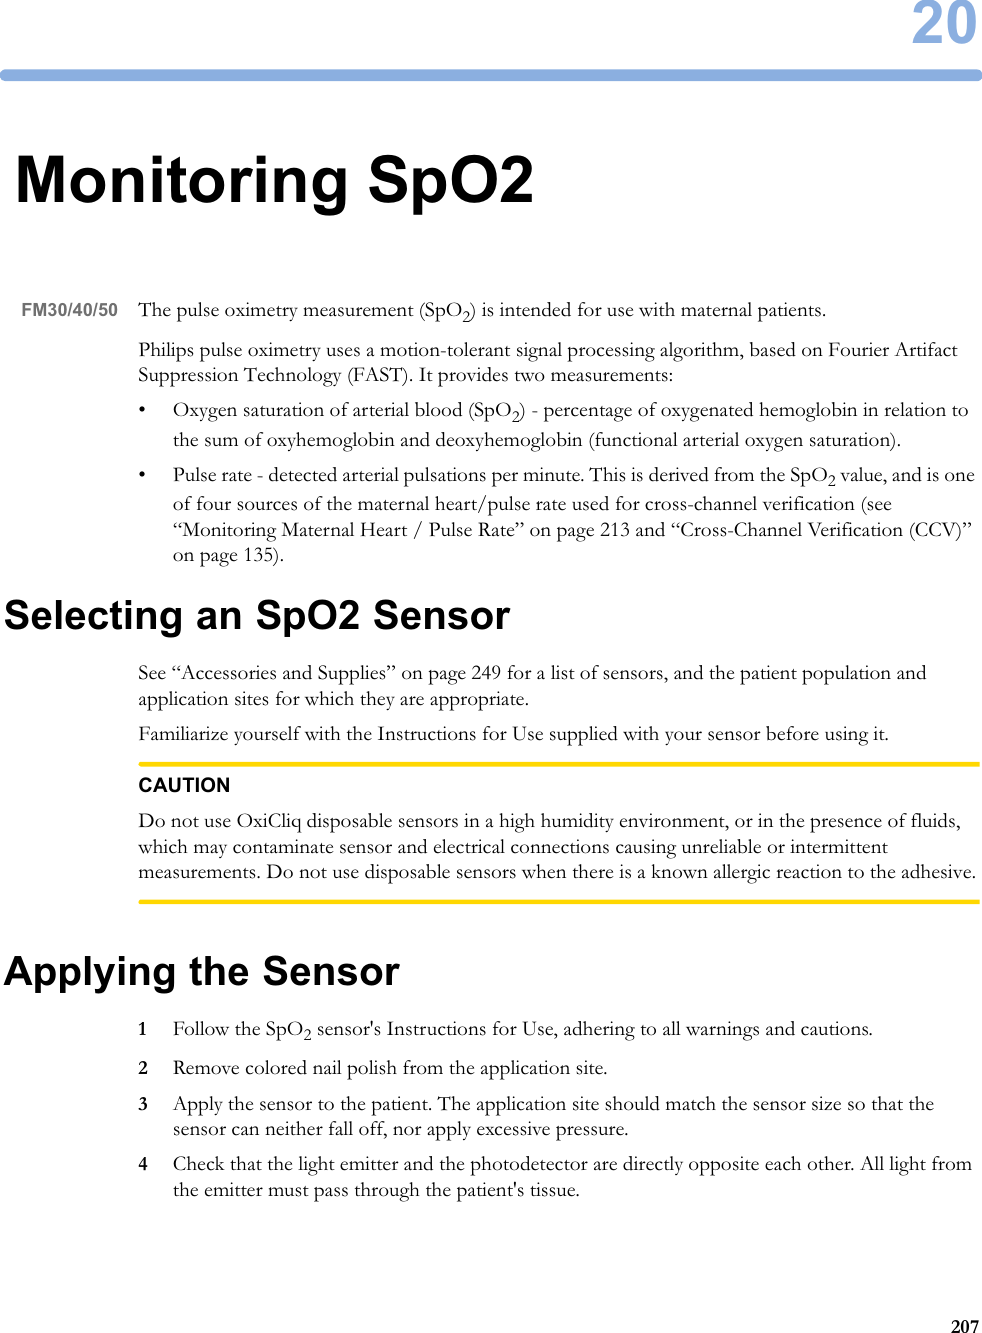 2020720Monitoring SpO2FM30/40/50 The pulse oximetry measurement (SpO2) is intended for use with maternal patients.Philips pulse oximetry uses a motion-tolerant signal processing algorithm, based on Fourier Artifact Suppression Technology (FAST). It provides two measurements:• Oxygen saturation of arterial blood (SpO2) - percentage of oxygenated hemoglobin in relation to the sum of oxyhemoglobin and deoxyhemoglobin (functional arterial oxygen saturation).• Pulse rate - detected arterial pulsations per minute. This is derived from the SpO2 value, and is one of four sources of the maternal heart/pulse rate used for cross-channel verification (see “Monitoring Maternal Heart / Pulse Rate” on page 213 and “Cross-Channel Verification (CCV)” on page 135).Selecting an SpO2 SensorSee “Accessories and Supplies” on page 249 for a list of sensors, and the patient population and application sites for which they are appropriate.Familiarize yourself with the Instructions for Use supplied with your sensor before using it.CAUTIONDo not use OxiCliq disposable sensors in a high humidity environment, or in the presence of fluids, which may contaminate sensor and electrical connections causing unreliable or intermittent measurements. Do not use disposable sensors when there is a known allergic reaction to the adhesive.Applying the Sensor1Follow the SpO2 sensor&apos;s Instructions for Use, adhering to all warnings and cautions.2Remove colored nail polish from the application site.3Apply the sensor to the patient. The application site should match the sensor size so that the sensor can neither fall off, nor apply excessive pressure.4Check that the light emitter and the photodetector are directly opposite each other. All light from the emitter must pass through the patient&apos;s tissue.